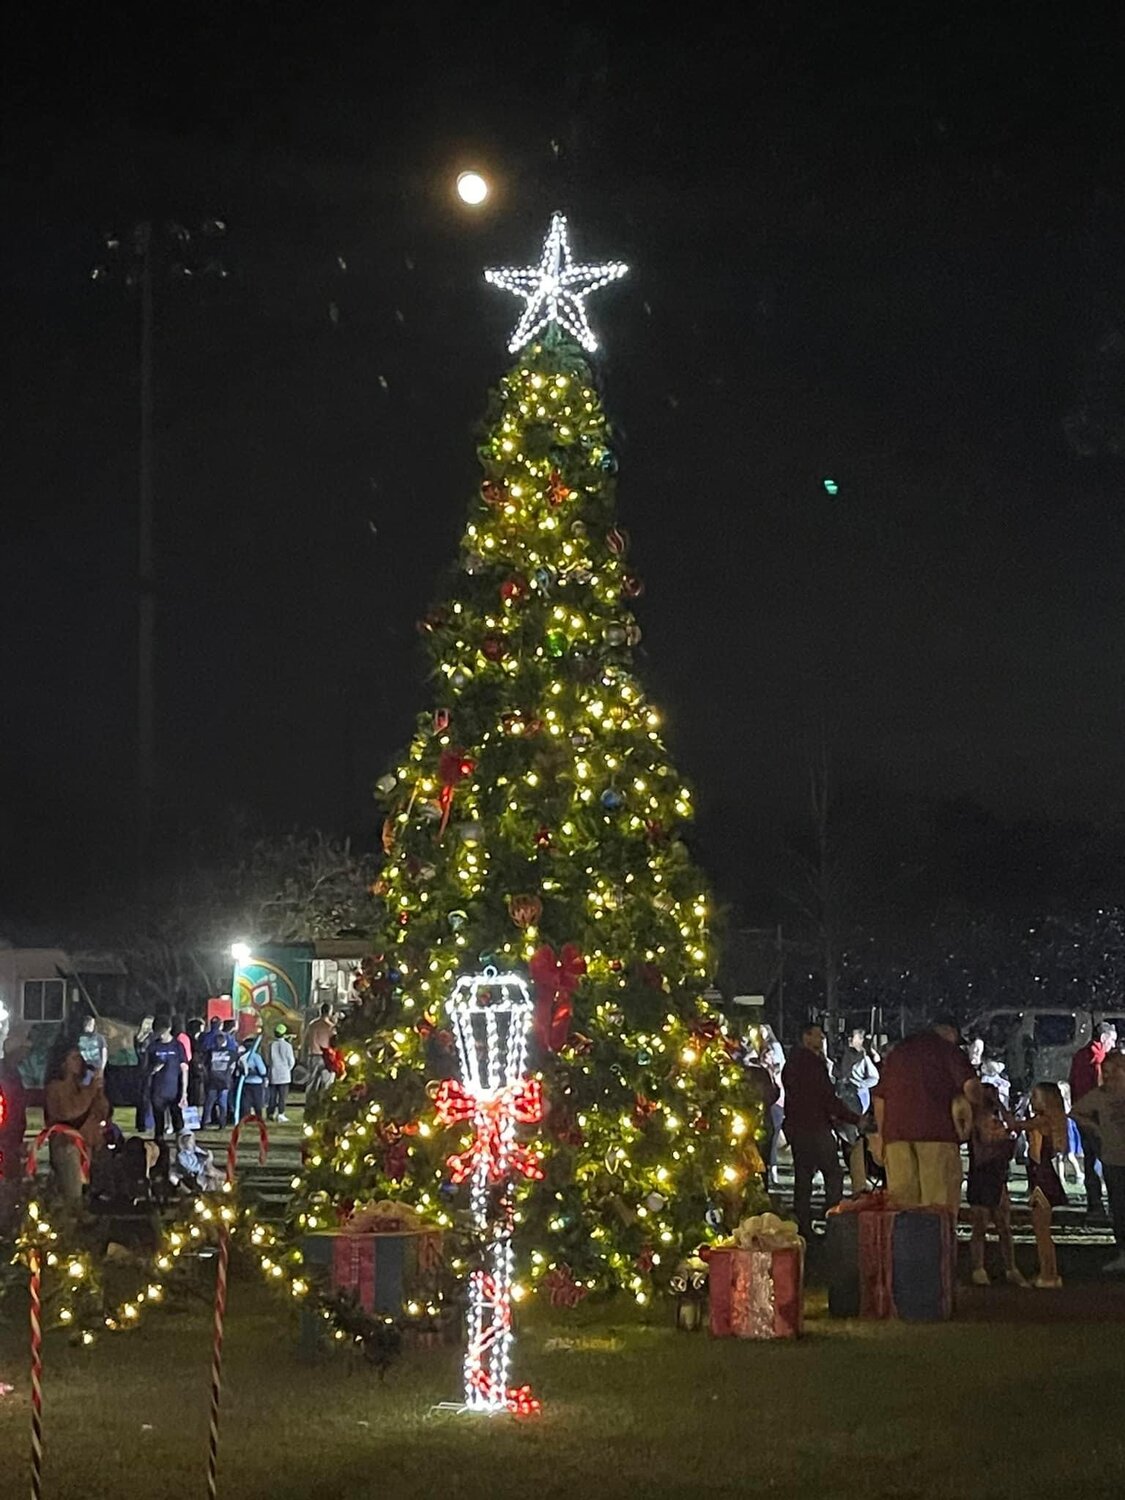 City of Loxley hosting holiday events on Dec. 8 Gulf Coast Media